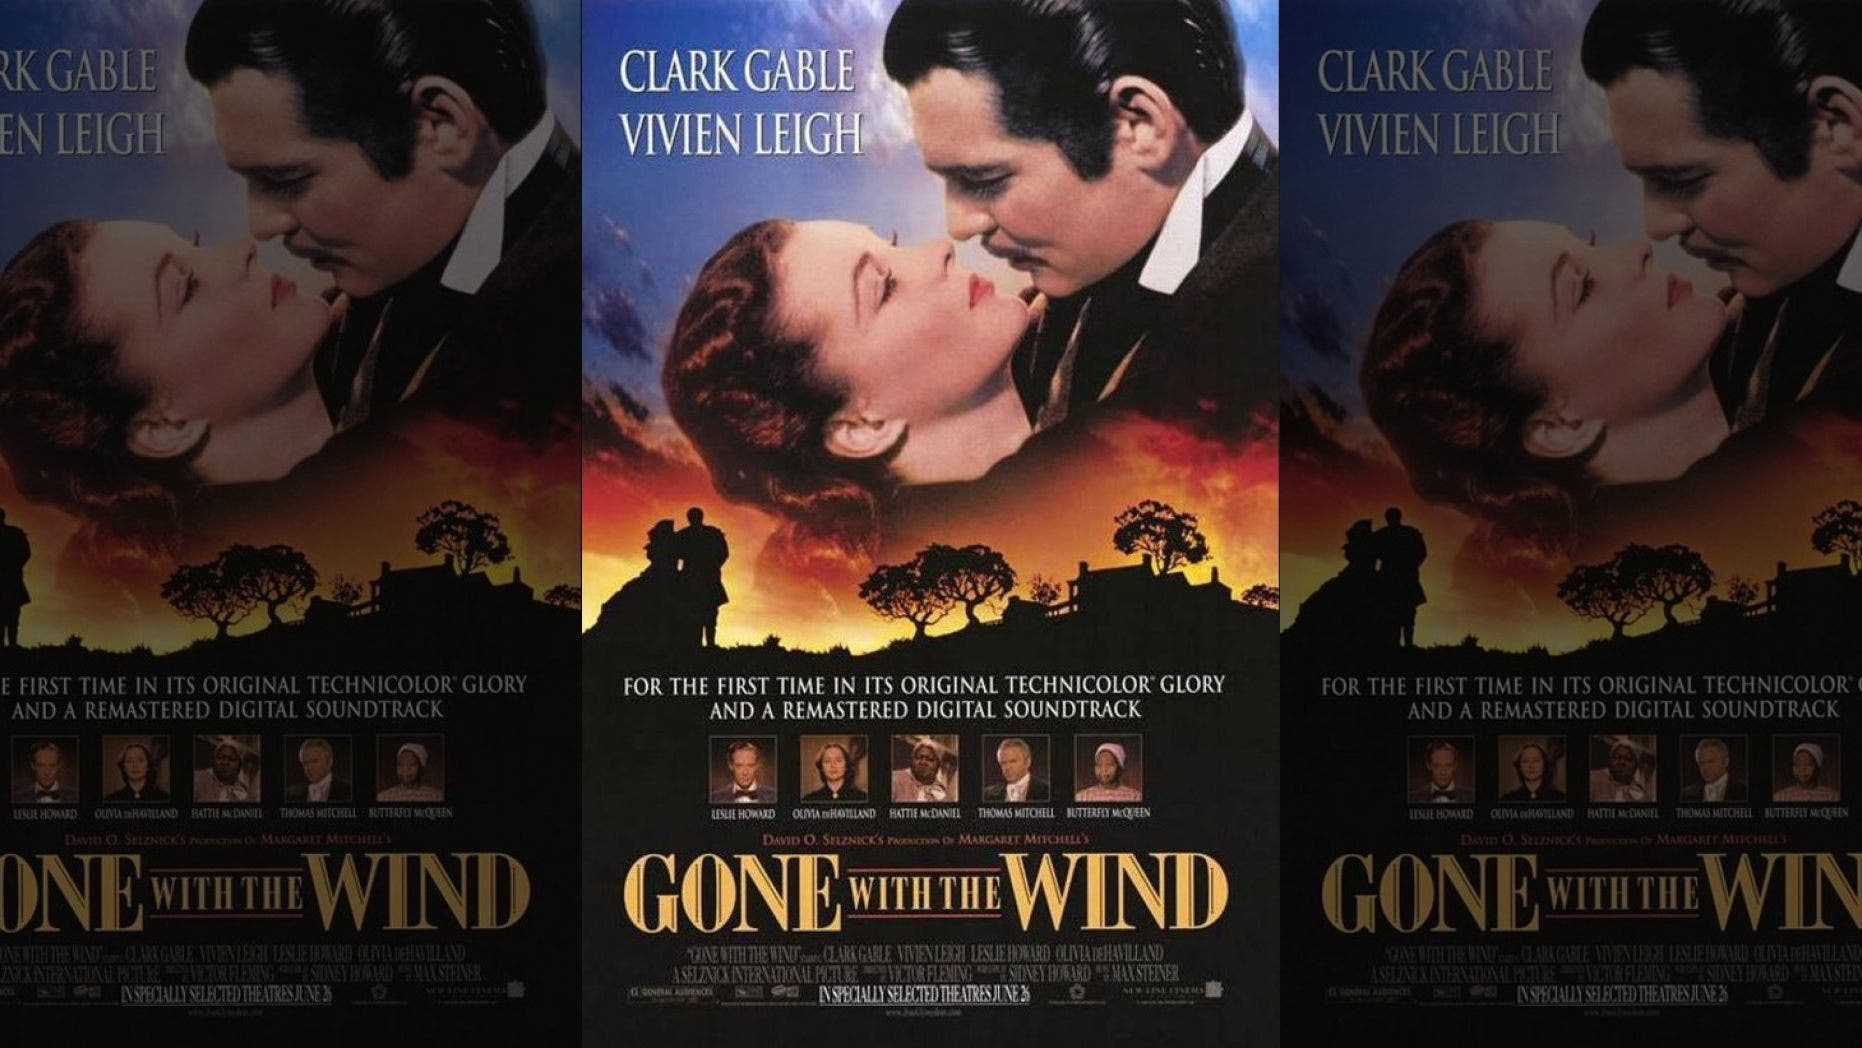 ‘Gone With the Wind’ returning to theaters for 80th anniversary – but reception may be mixed